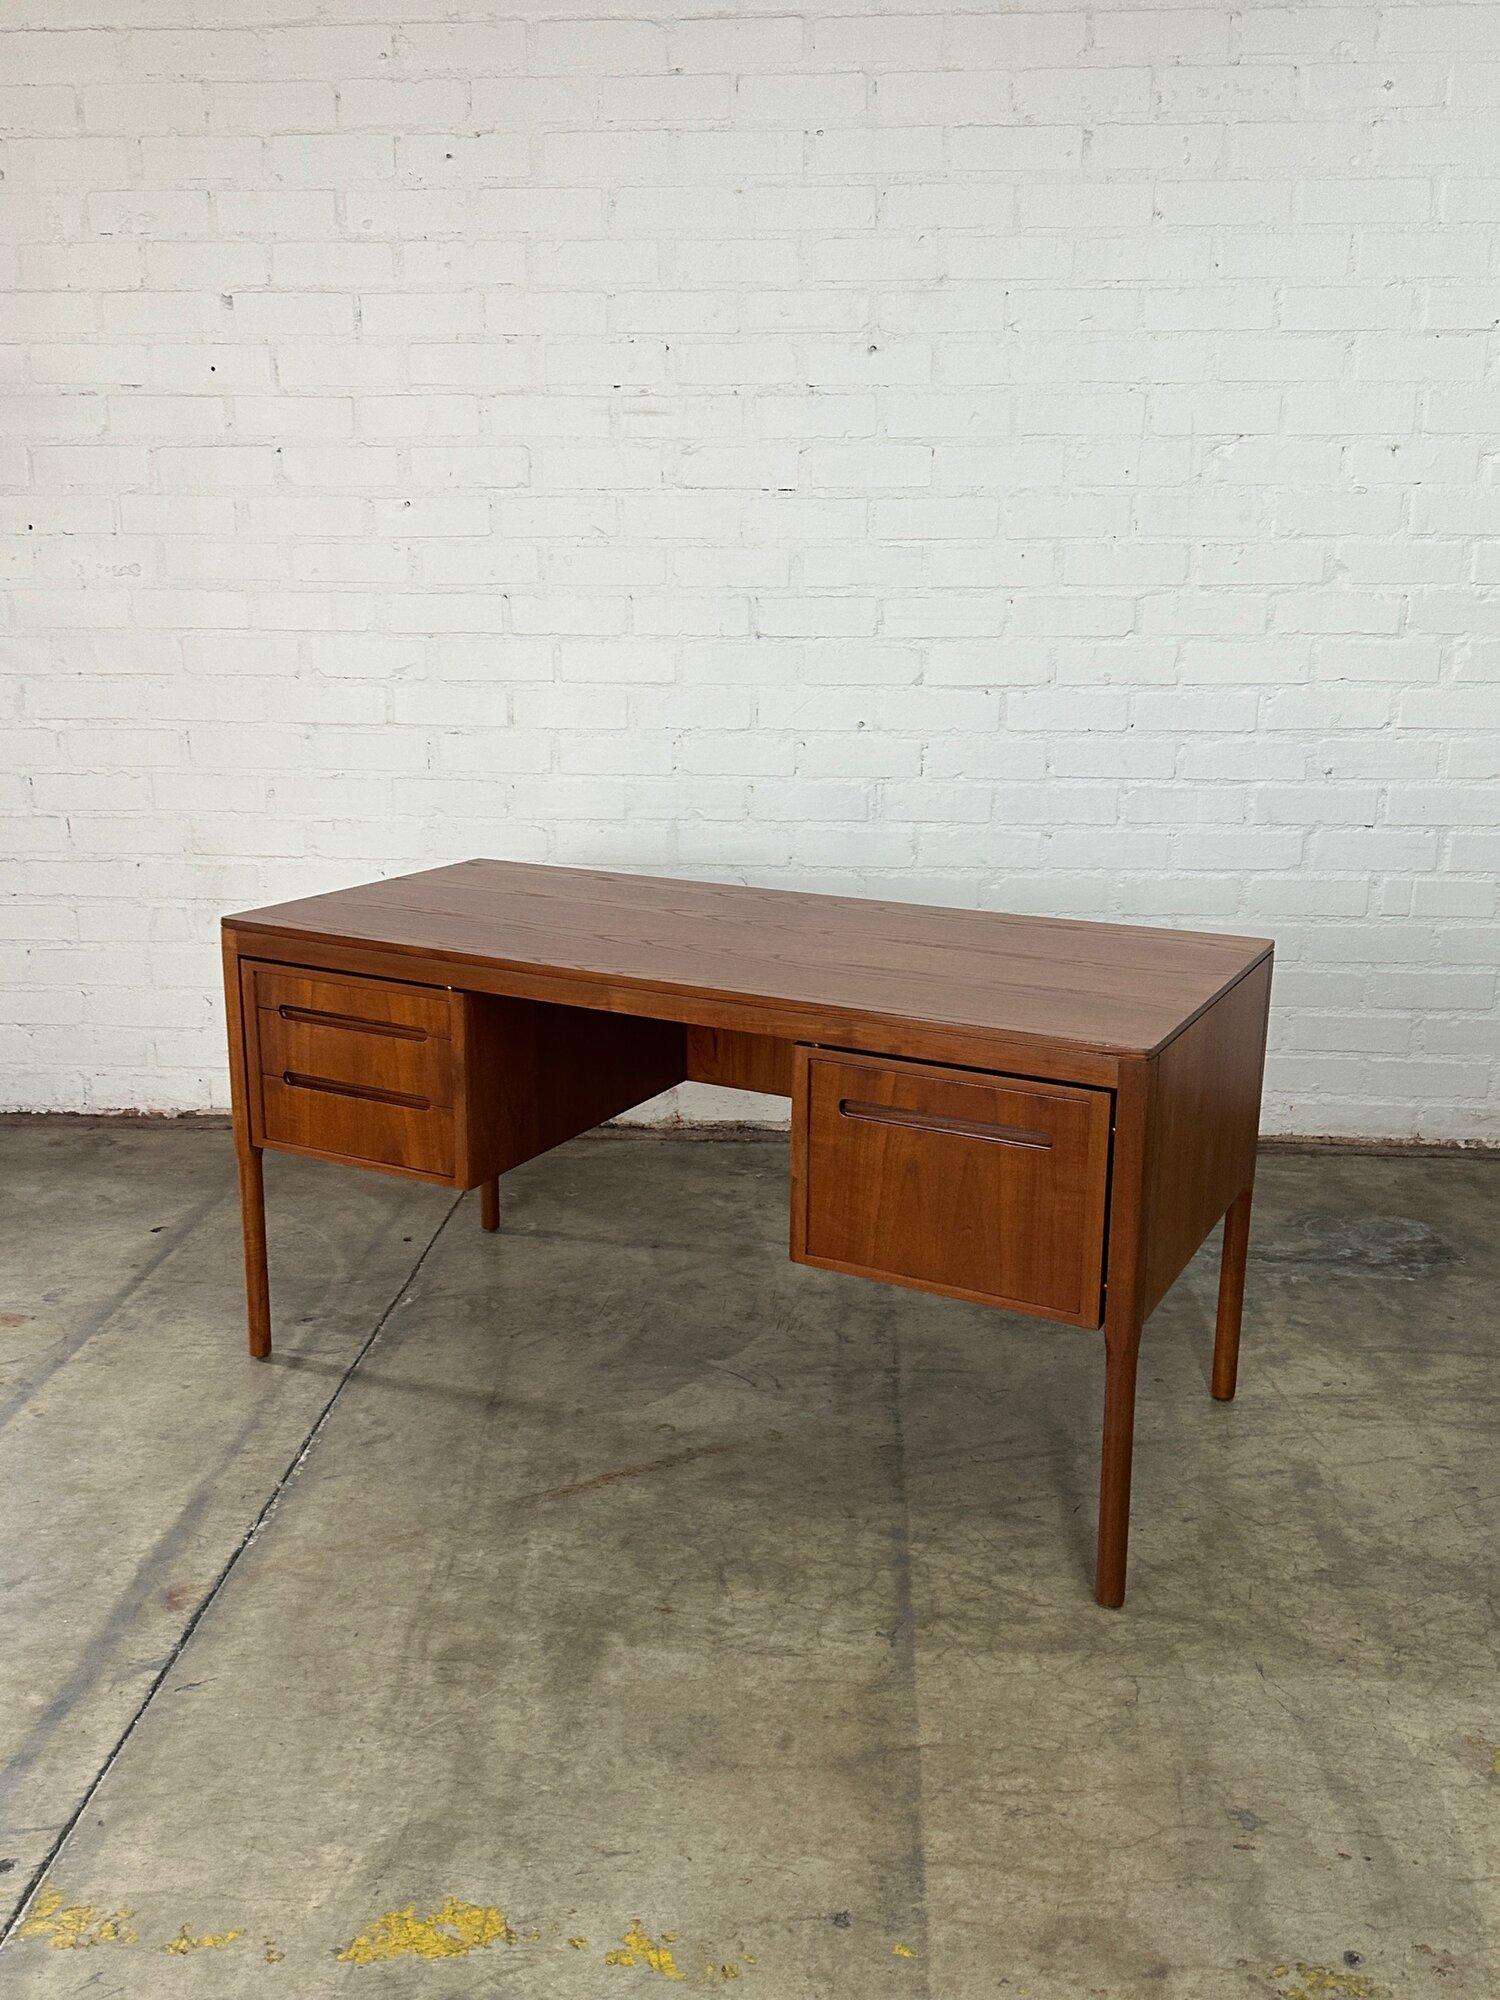 W59 D26.5 H30 Knee clearance 21.75

Danish modern desk in teak. Item has been fully restored. Desk is structurally sound and fully functional. Item shows well with no major areas of wear. 